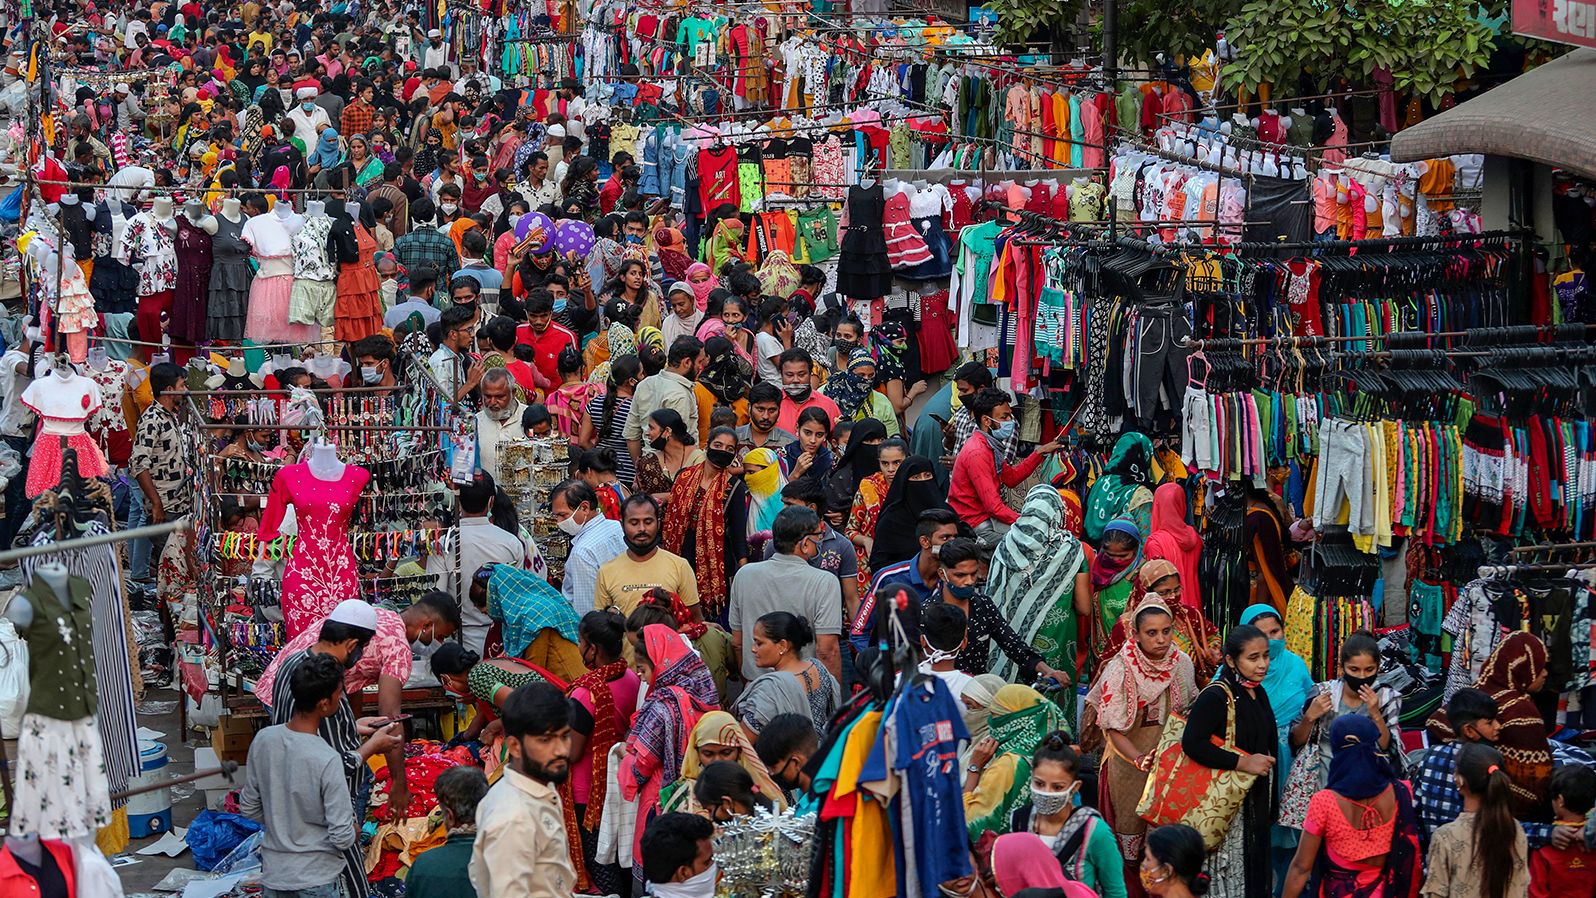 Indians throng a market for shopping ahead of Hindu festival Diwali in Ahmedabad, India, on Novermber 9, 2020.